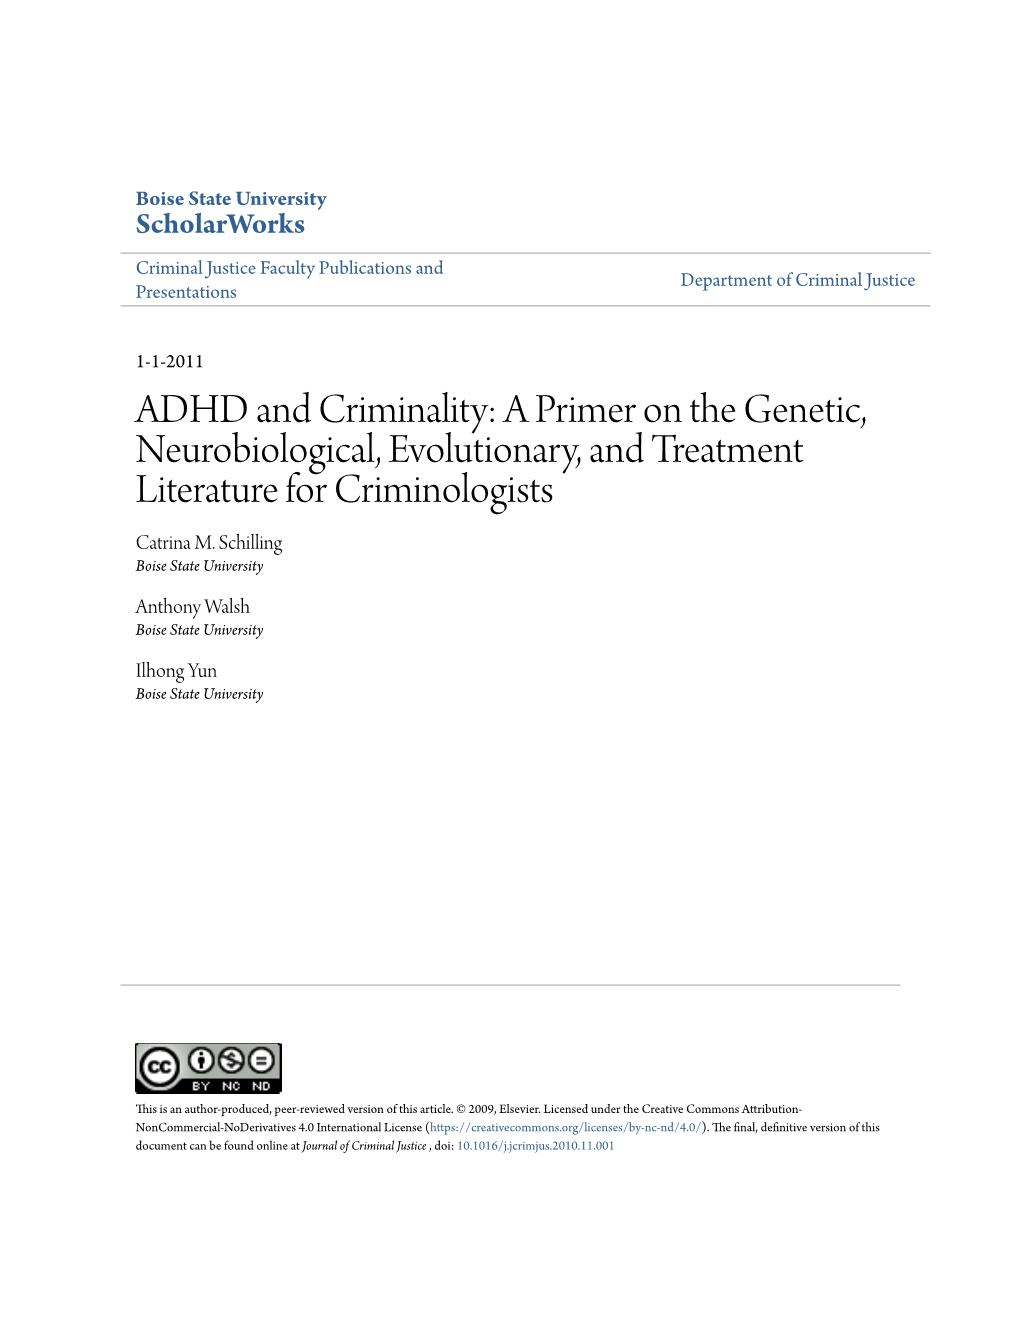 ADHD and Criminality: a Primer on the Genetic, Neurobiological, Evolutionary, and Treatment Literature for Criminologists Catrina M